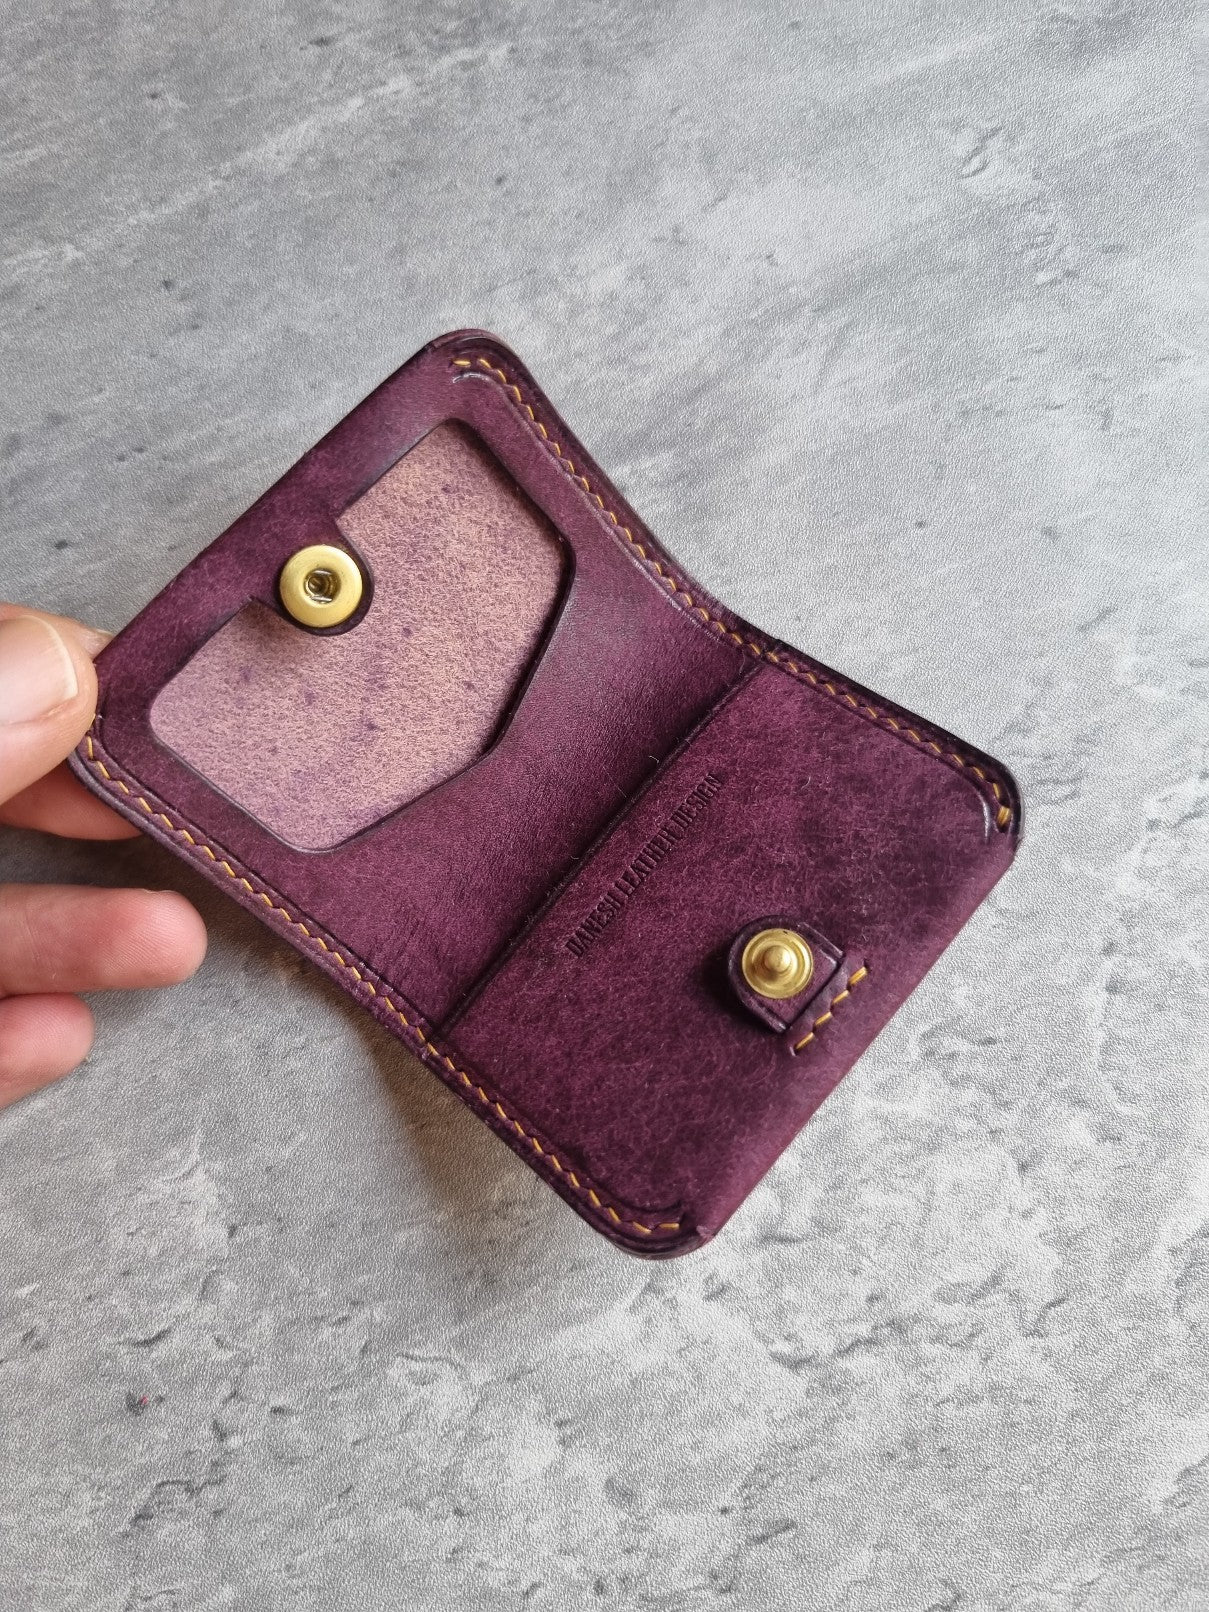 The Kolikko wallets | DIY | Pattern Pdf | Leather craft template | 2 sizes included